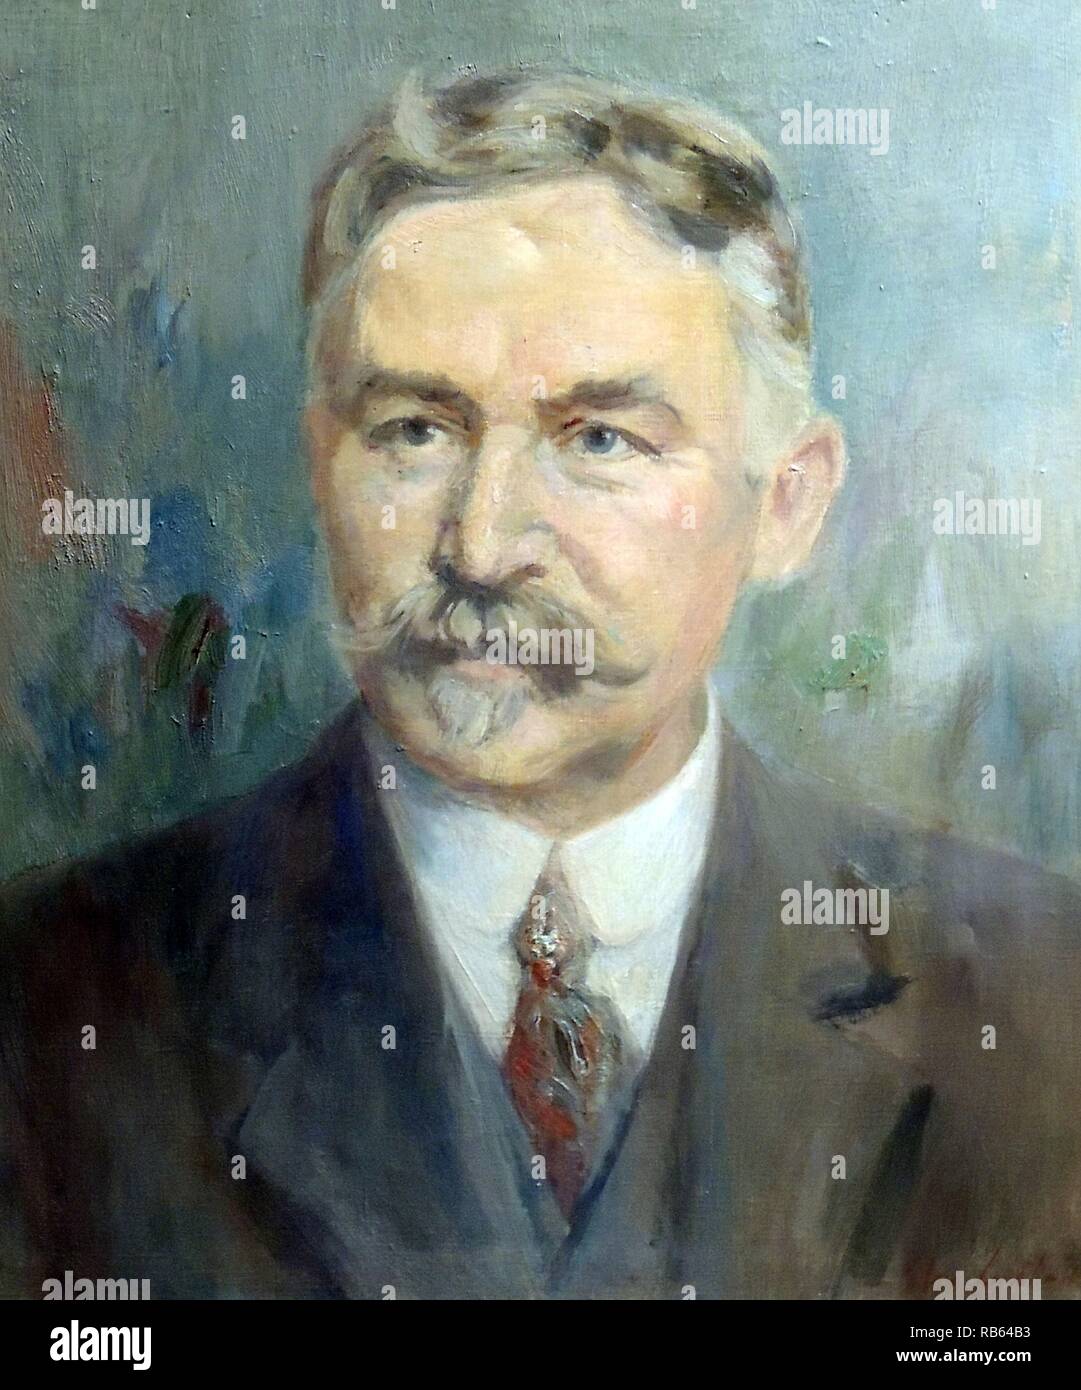 Christian Strom Steen (21 May 1854 - 1932) was a Norwegian businessperson. Stock Photo